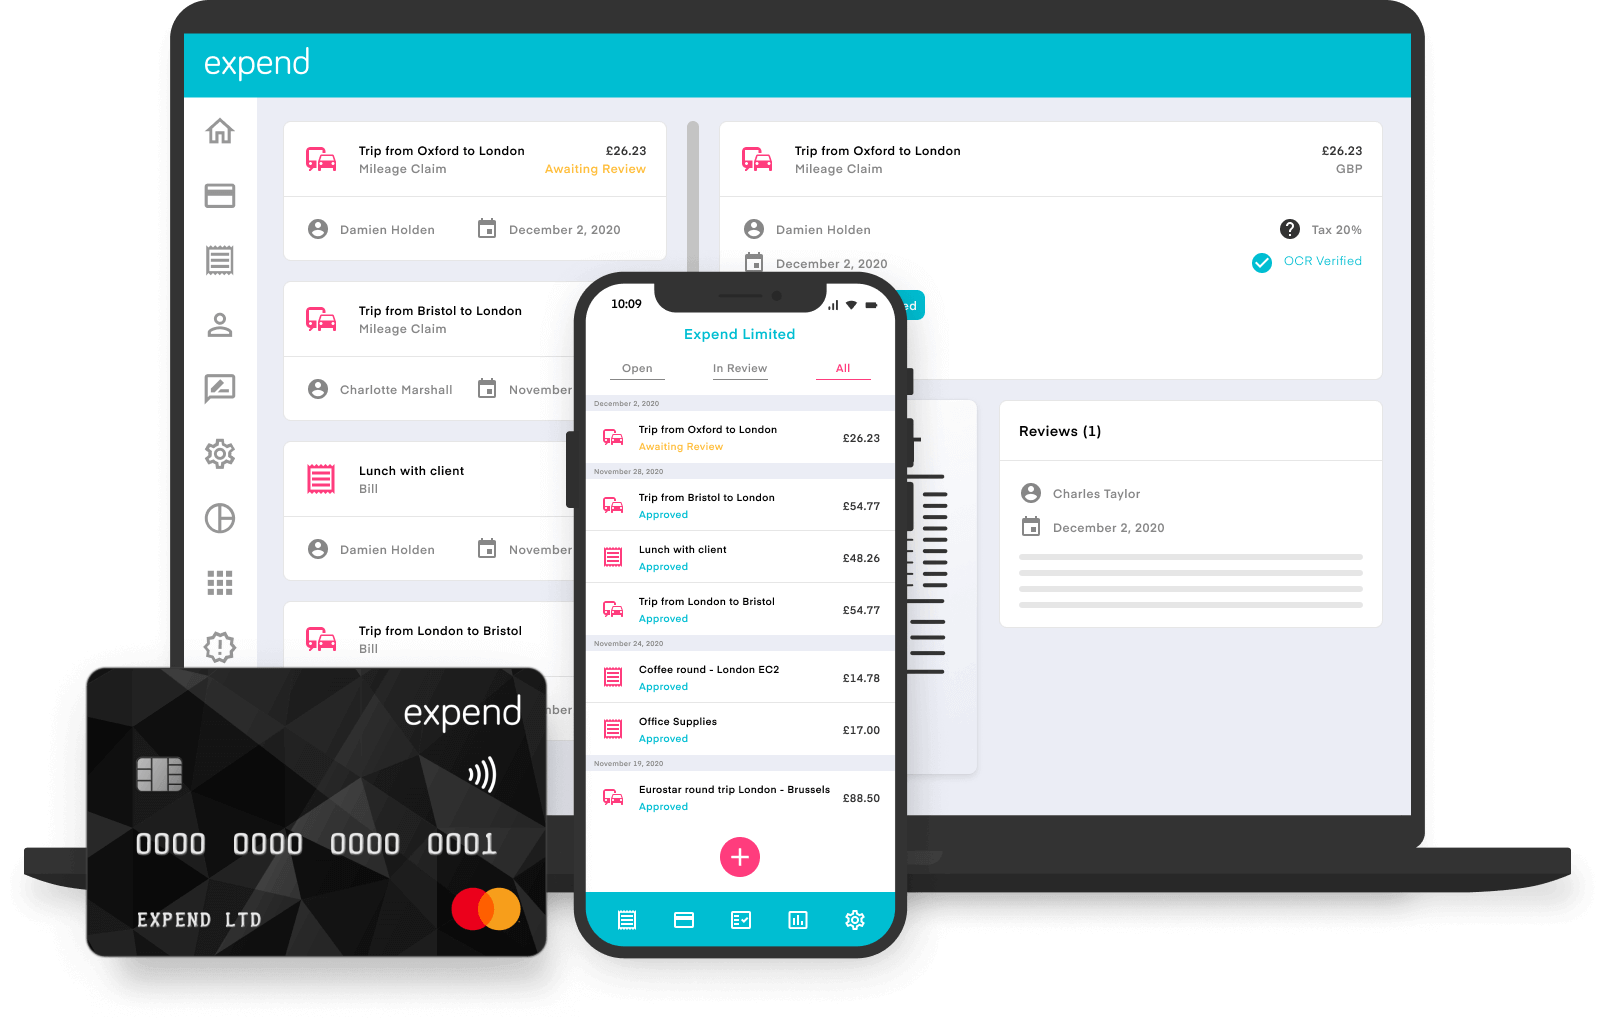 Expend: Prepaid Business Cards & Expense Management Software